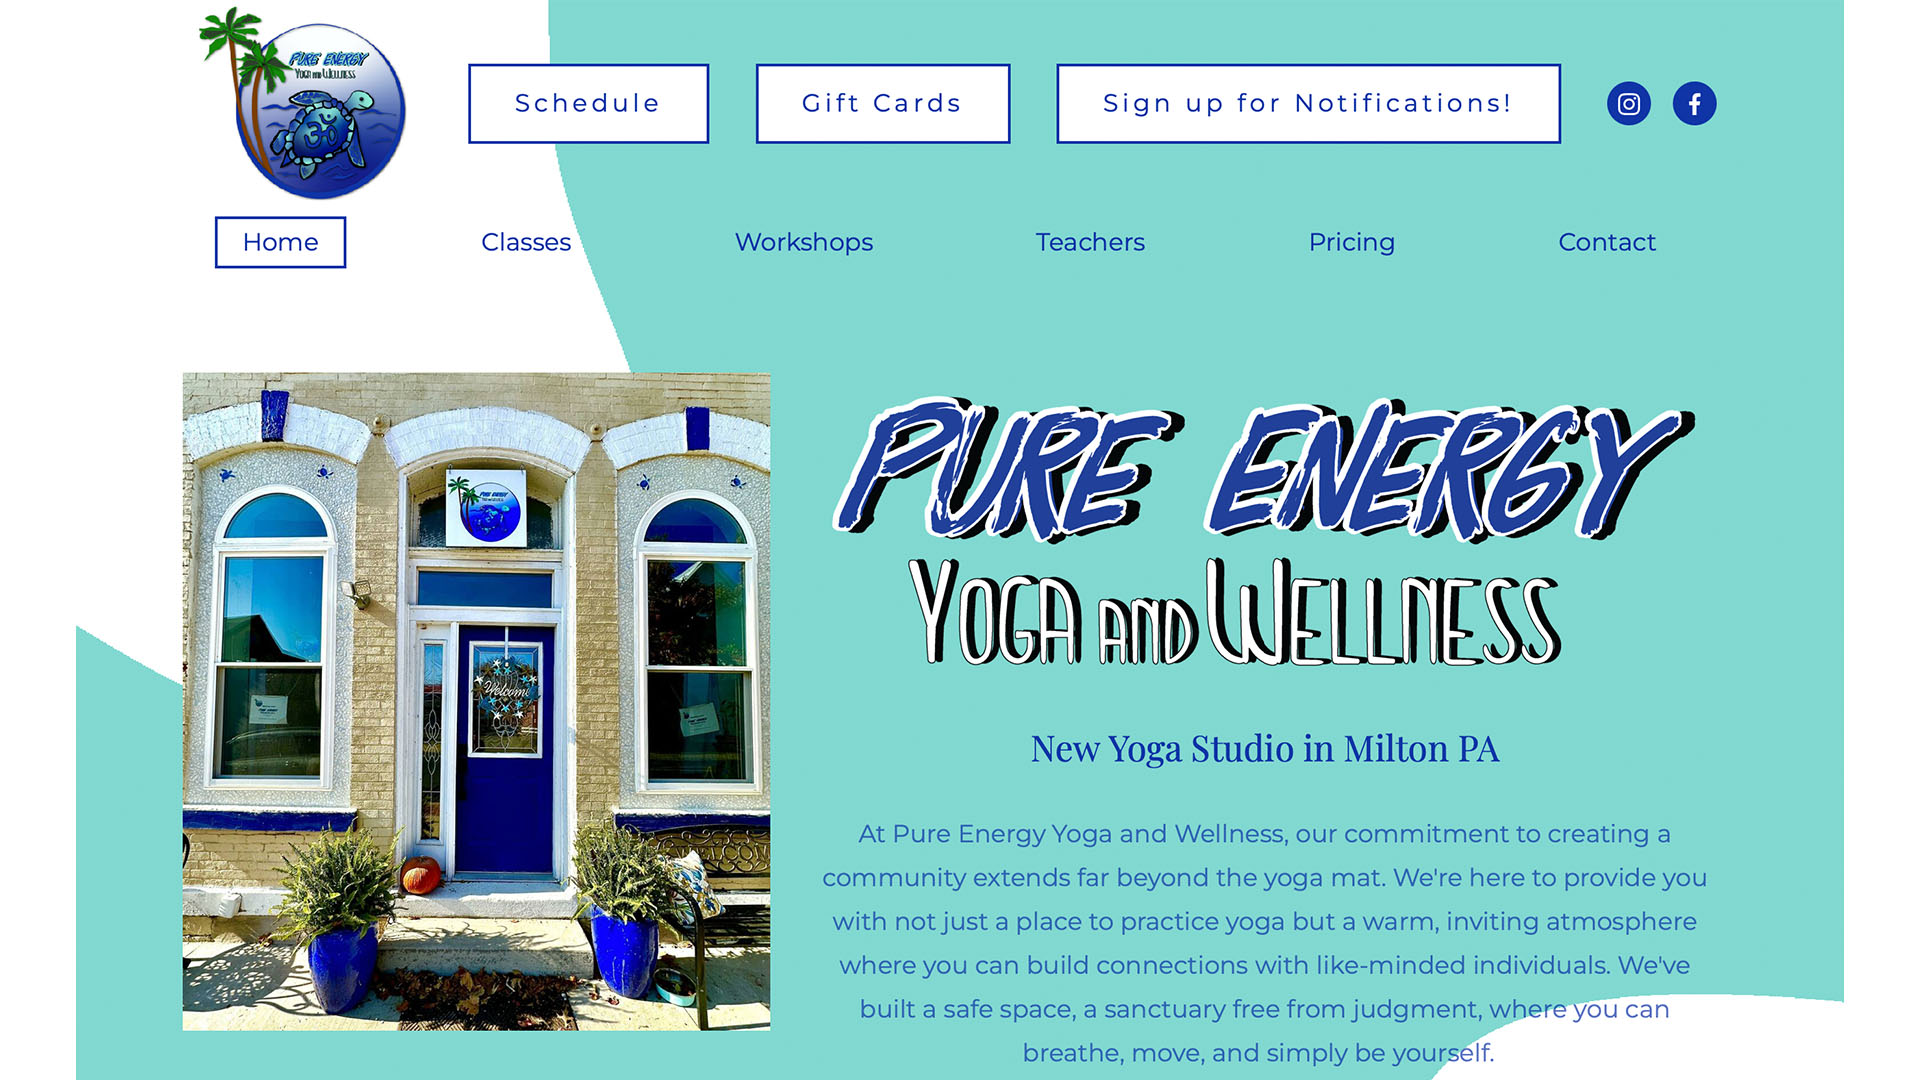 We created the Website Pure Energy Yoga and Wellness using MindBodyOnline for Scheduling. 